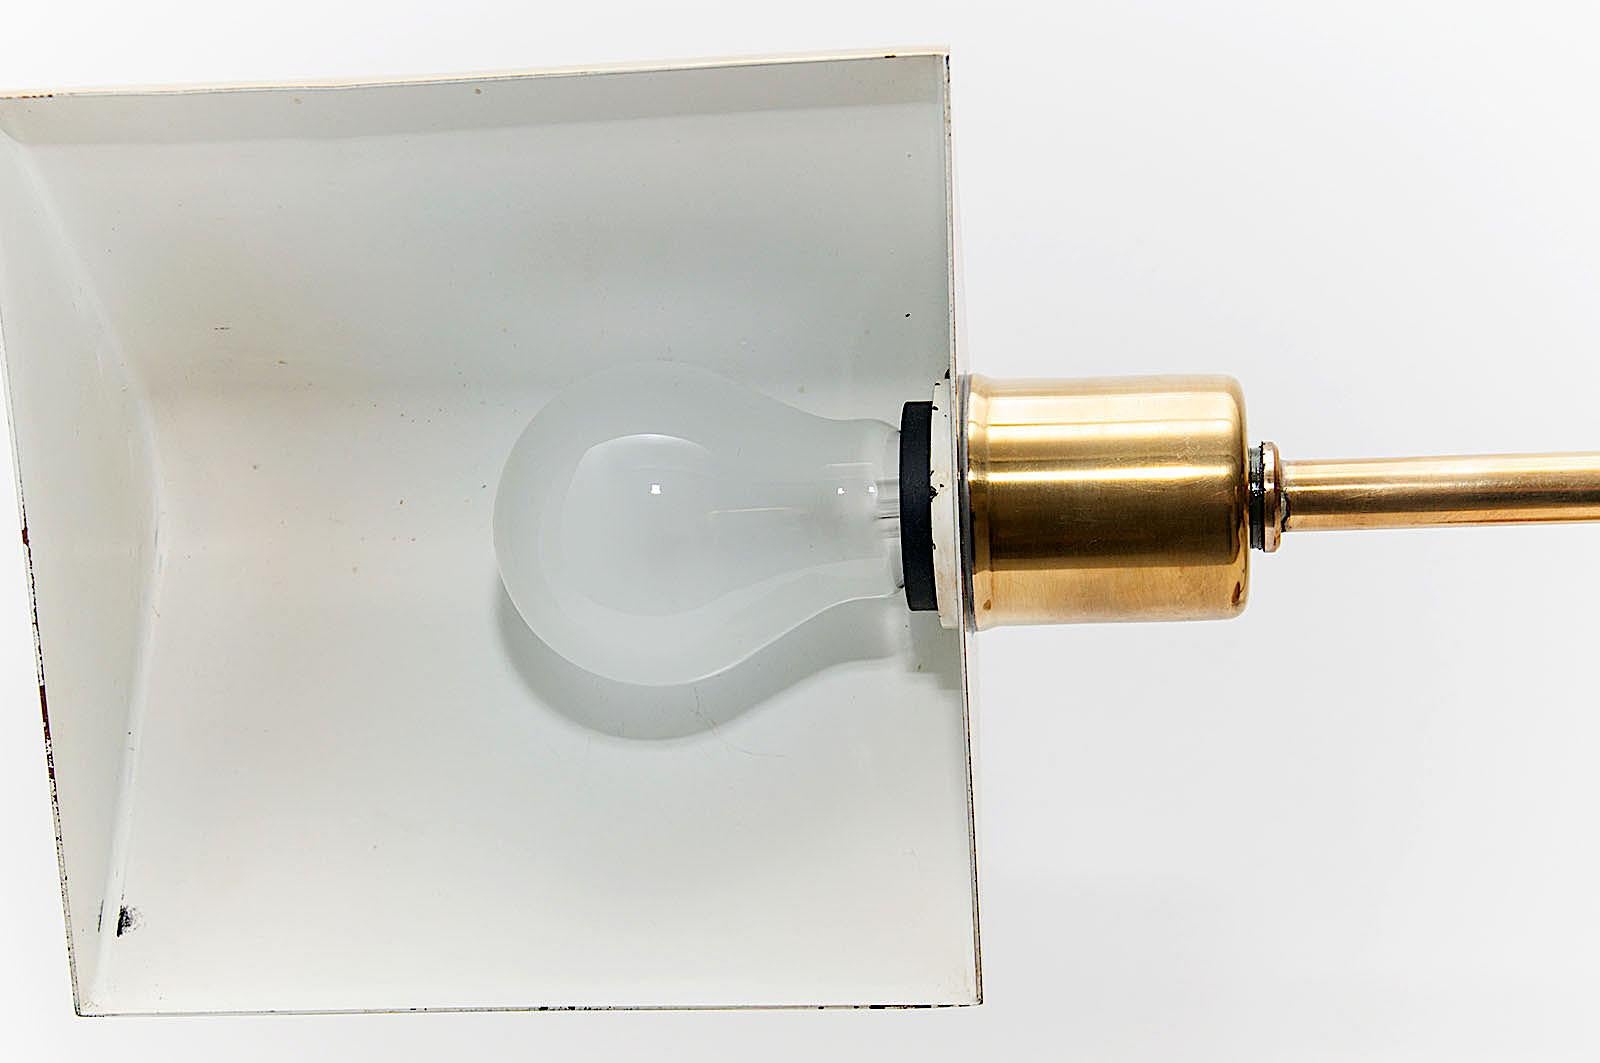 Mid-Century Modern Table Lamp, Vintage in Brass, 1970s, Articulated Arm, in a Brass Color